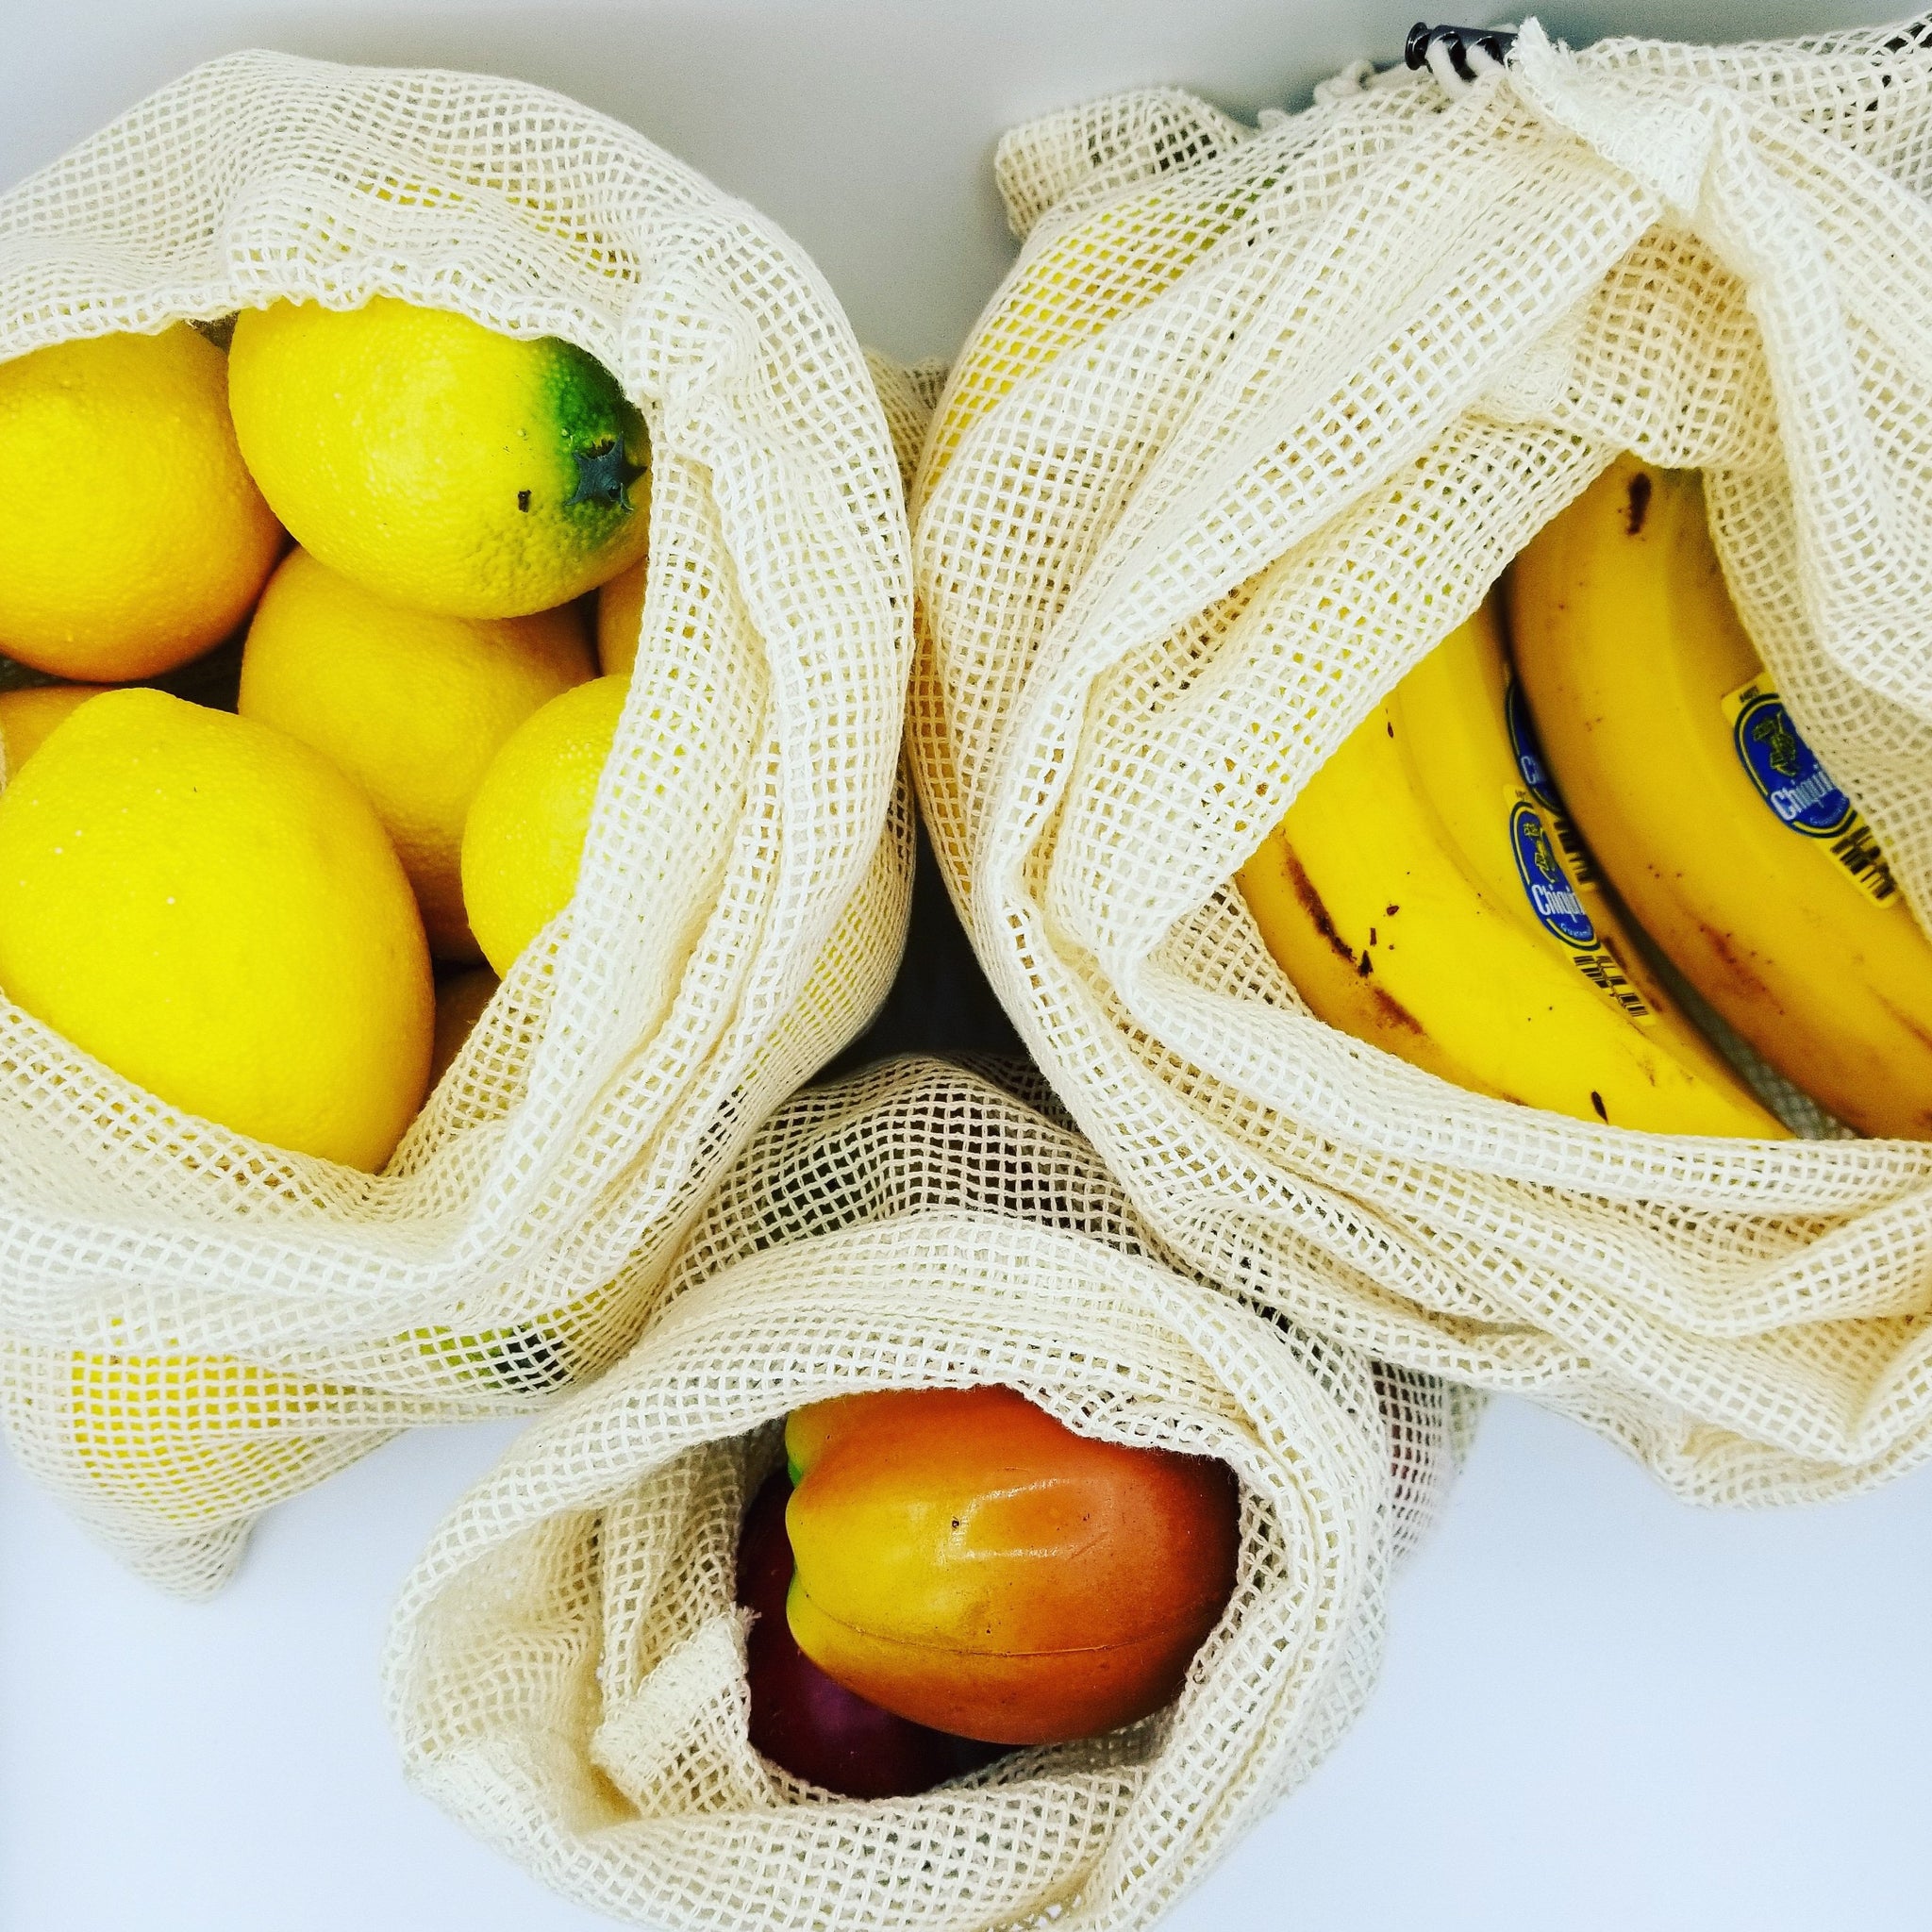 3 Pack Cotton mesh produce bags - small, medium and large size, with fruit in them.